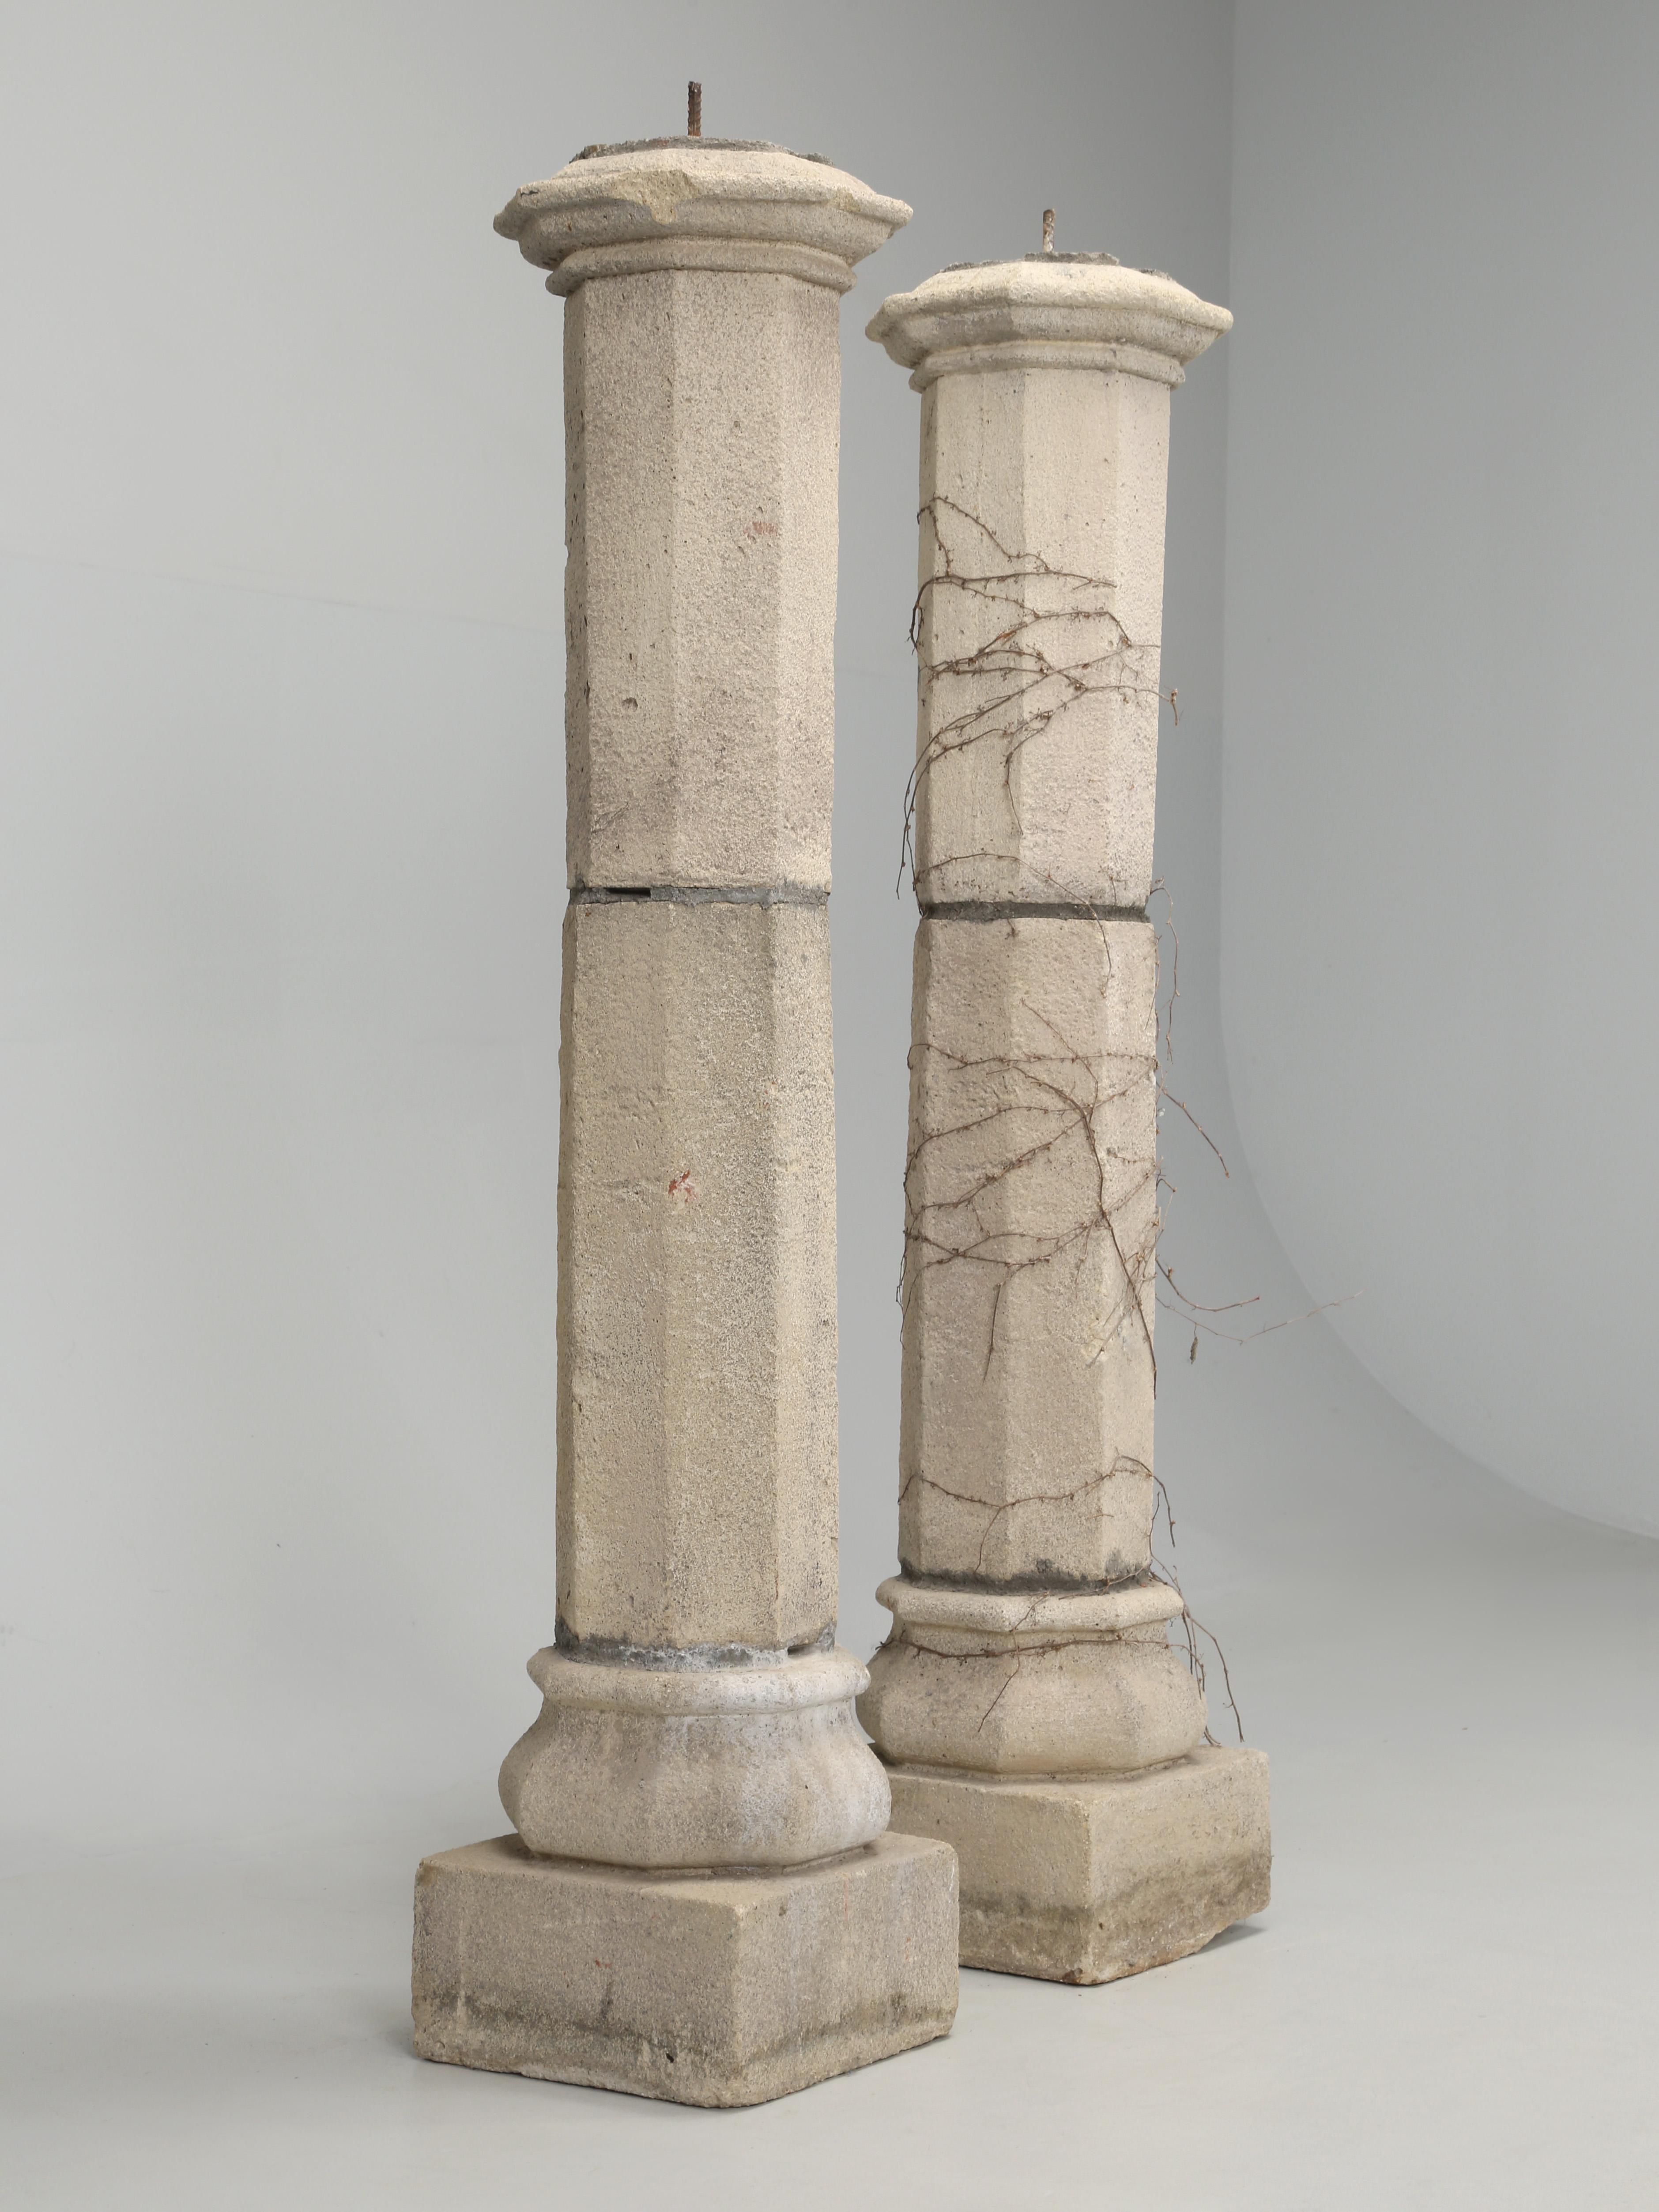 Pair of English stone columns, that are commonly referred to as 